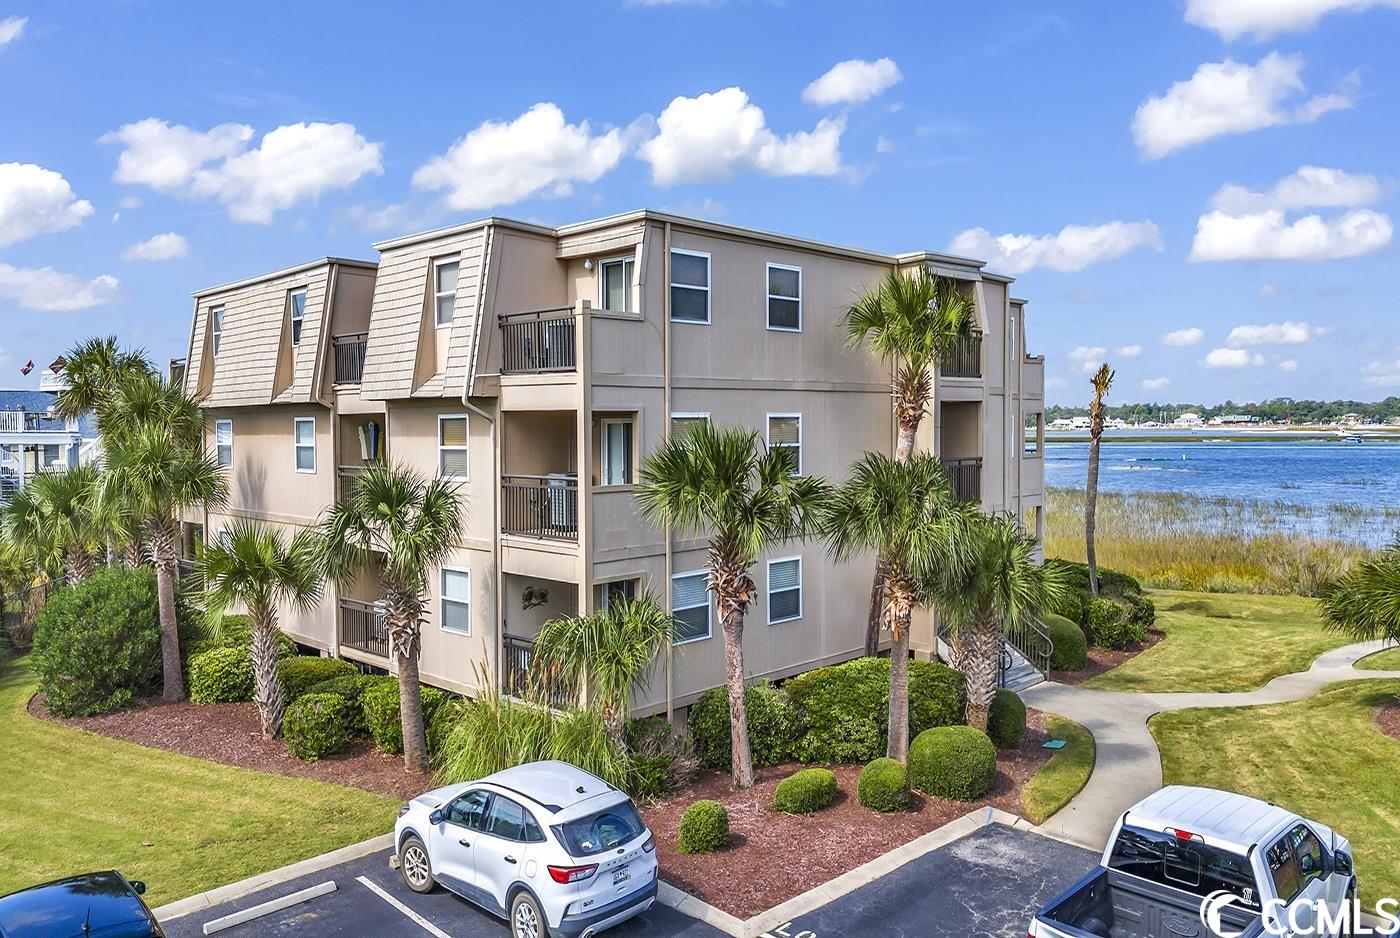 discover your coastal sanctuary at inlet pointe in garden city beach. this two-bedroom one bath furnished condo is located on the third floor in the building that is on the marsh. it has amazing views of the marsh and you can see the ocean from the balcony. inlet pointe is a gated community with many amenities including a marsh front swimming pool, long new dock, boat storage, and private access to the beach across the street.   inlet pointe is situated on 3.5 acres of land so there is plenty of outdoor space and a beautiful area to grill and watch the spectacular sunsets. inlet pointe is just a short walk to two restaurants and a marina. short term rentals are allowed.